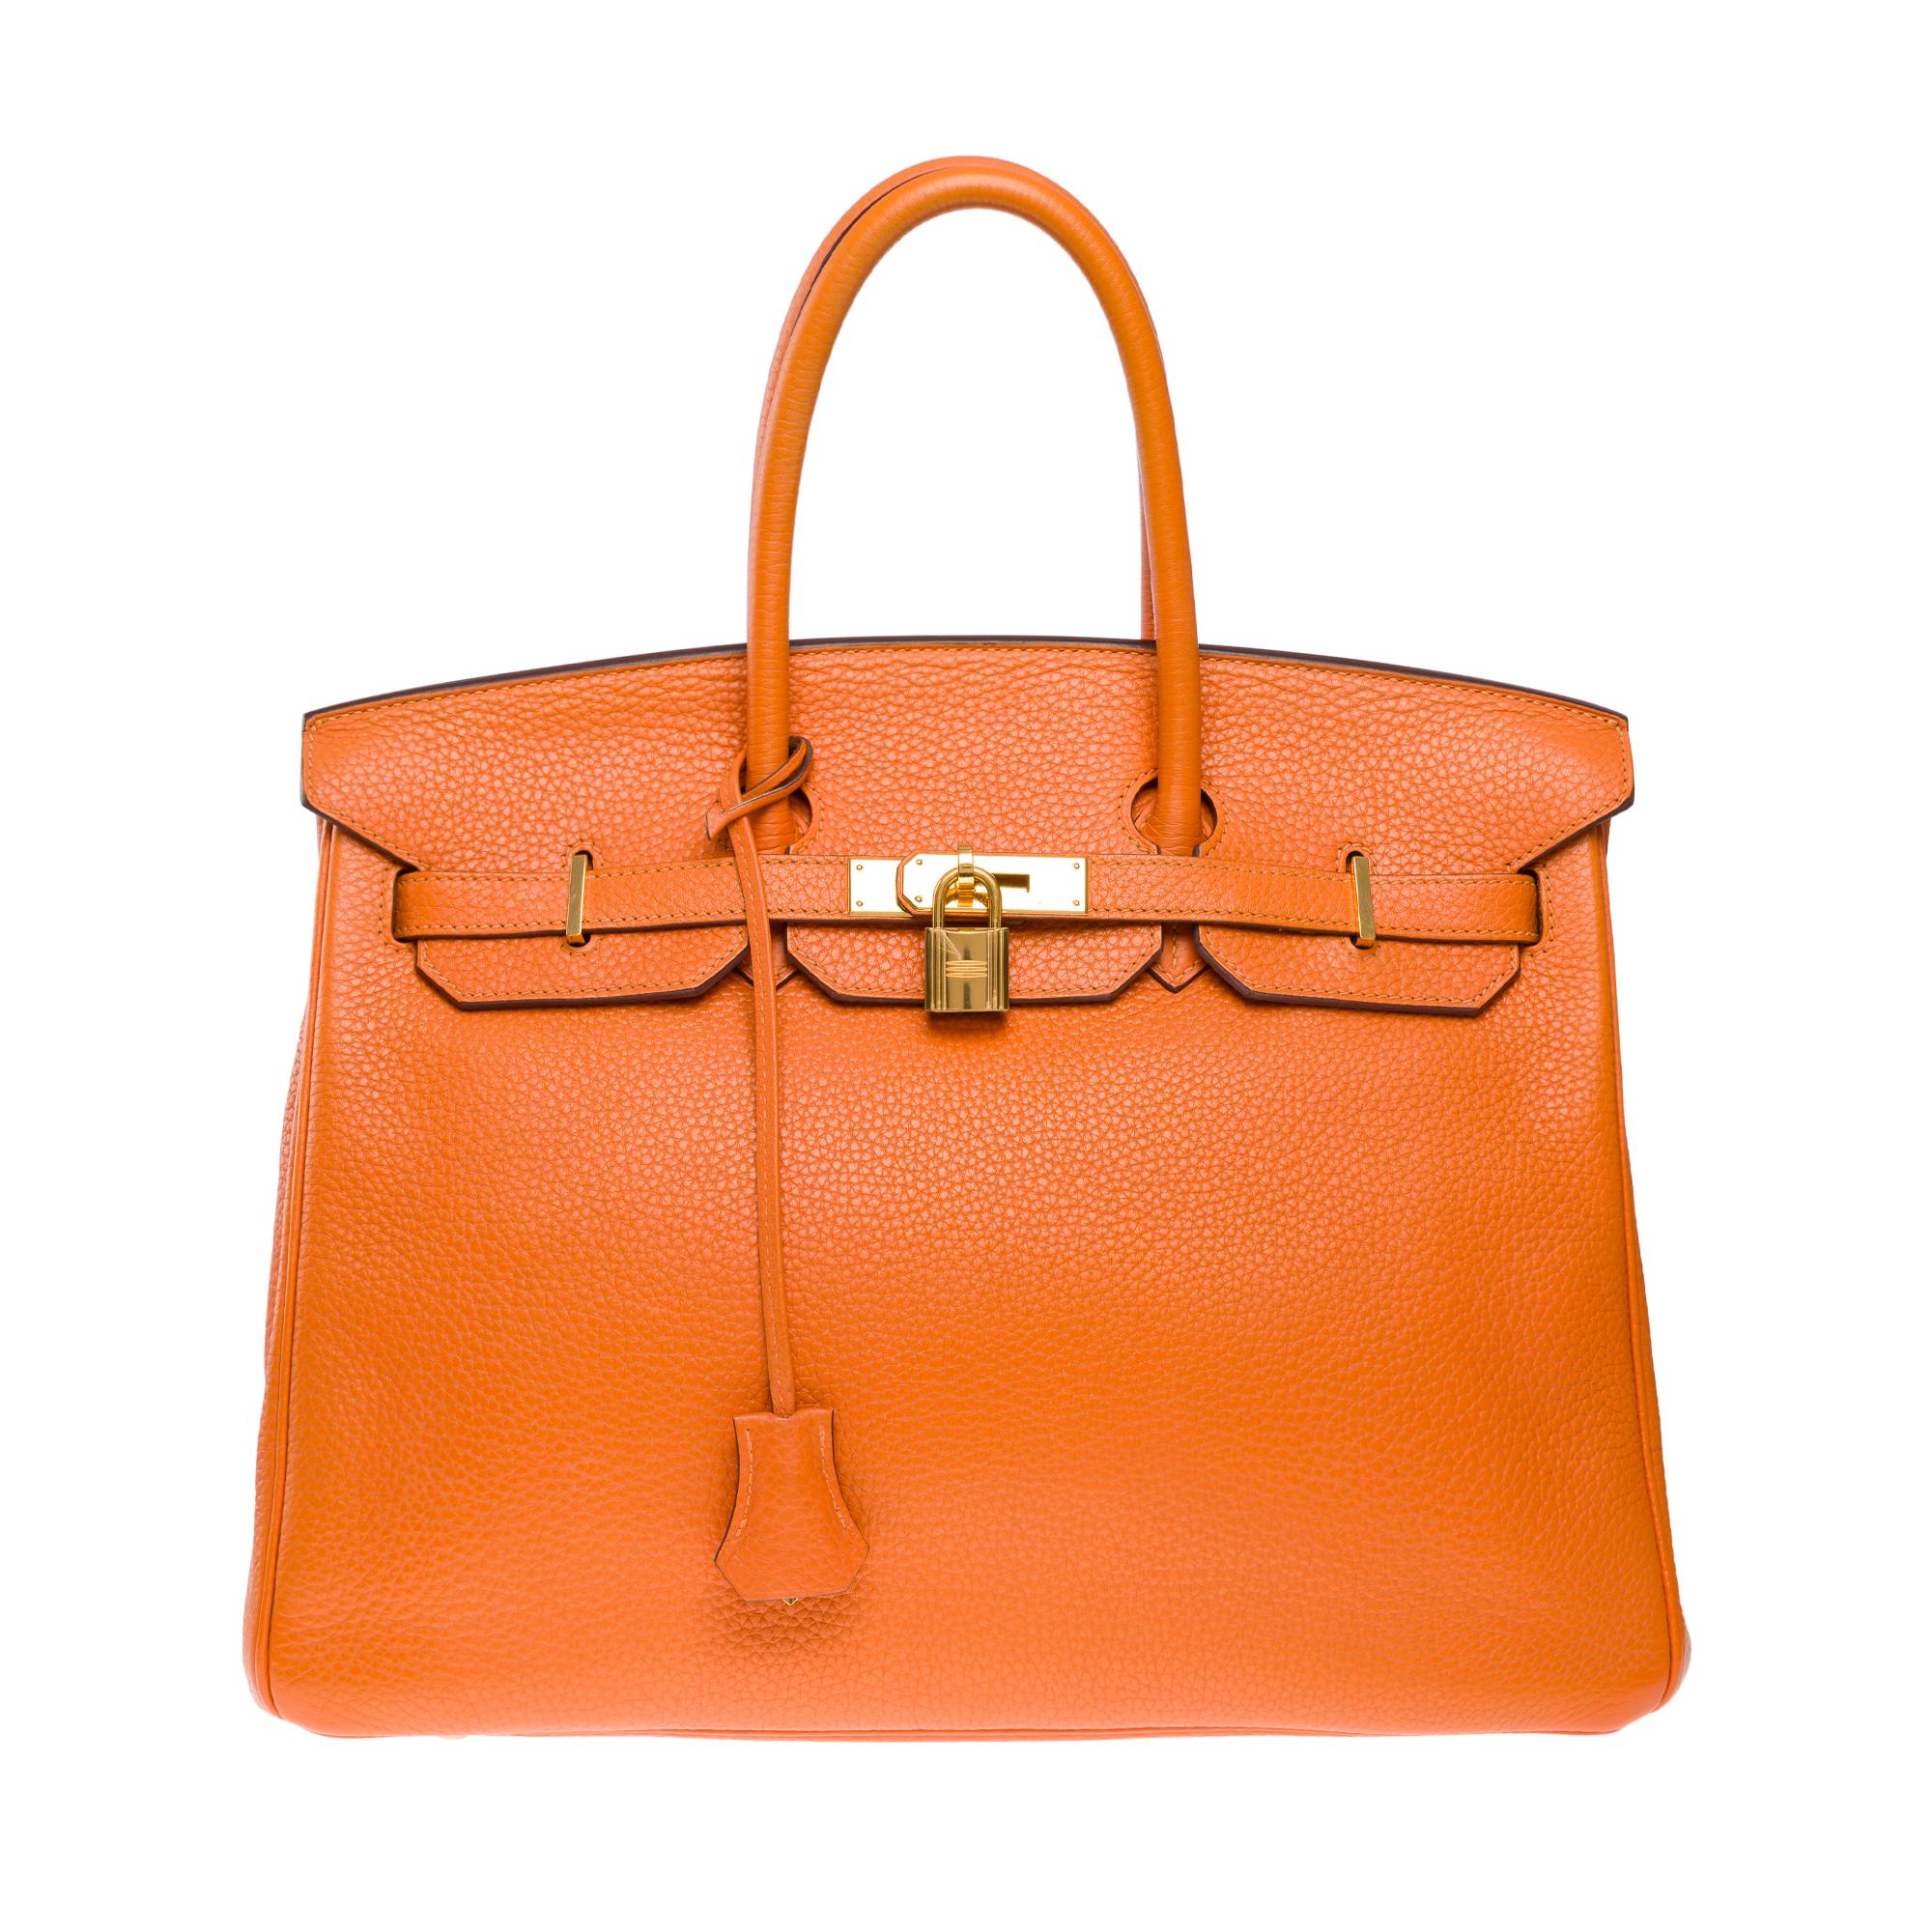 Bright​ ​Hermès​ ​Birkin​ ​35​ ​in​ ​Orange​ ​Togo​ ​calf​ ​leather,​ ​gold​ ​plated​ ​metal​ ​trim​ ​,​ ​double​ ​handle​ ​in​ ​orange​ ​leather​ ​allowing​ ​a​ ​hand​ ​carry

Flap​ ​closure
Inner​ ​lining​ ​in​ ​orange​ ​leather​ ​,​ ​a​